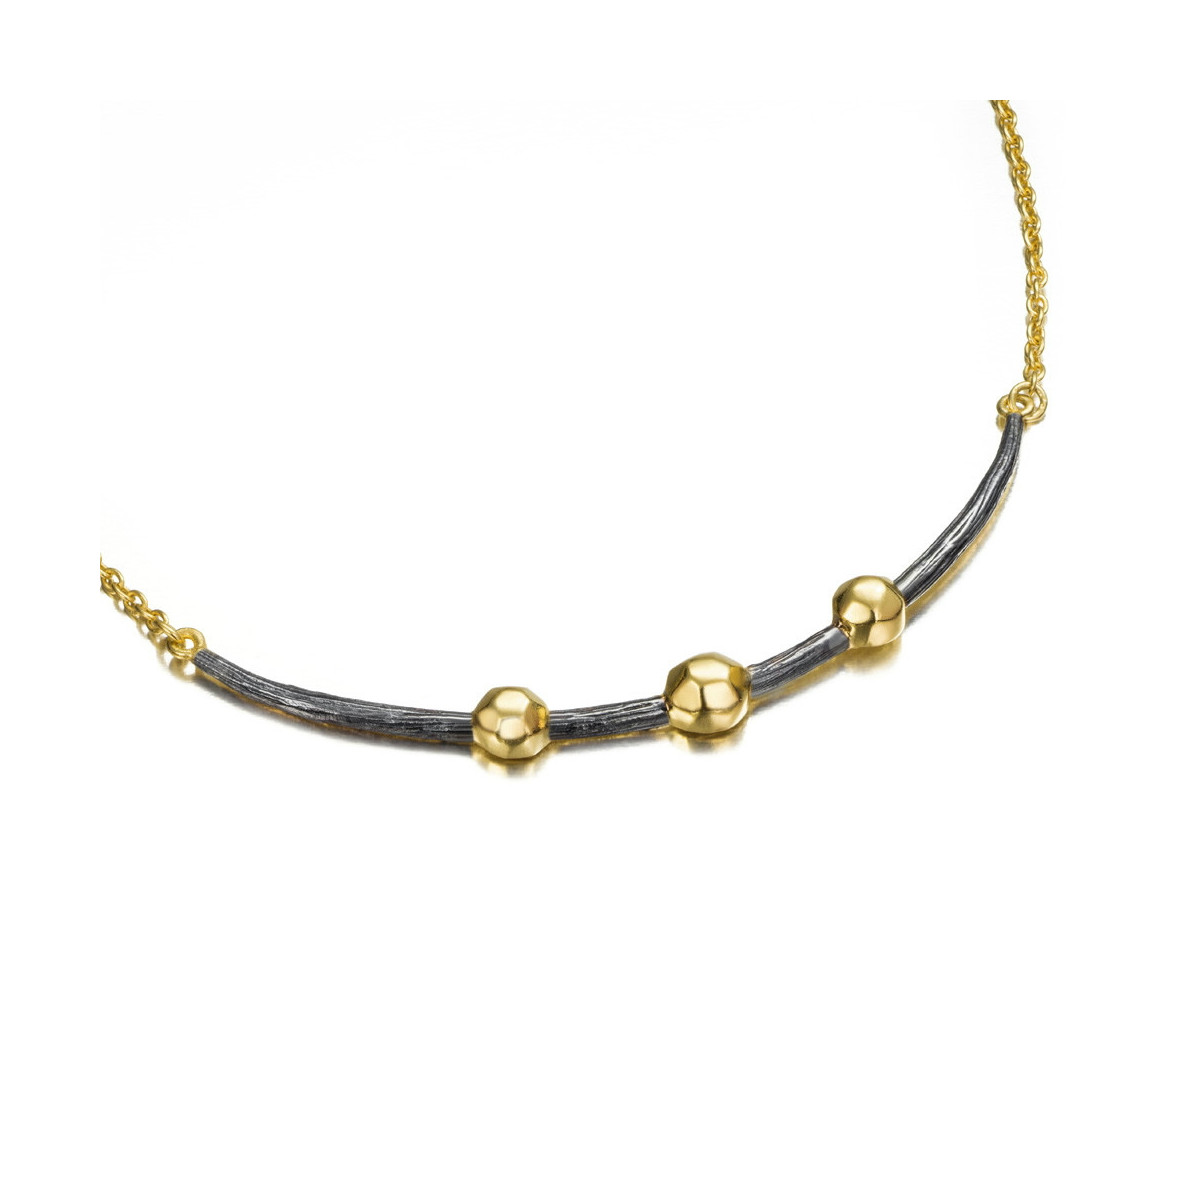 CELESTIAL Necklace in Silver. Black Ruthenium and 18k Gold Vermeil